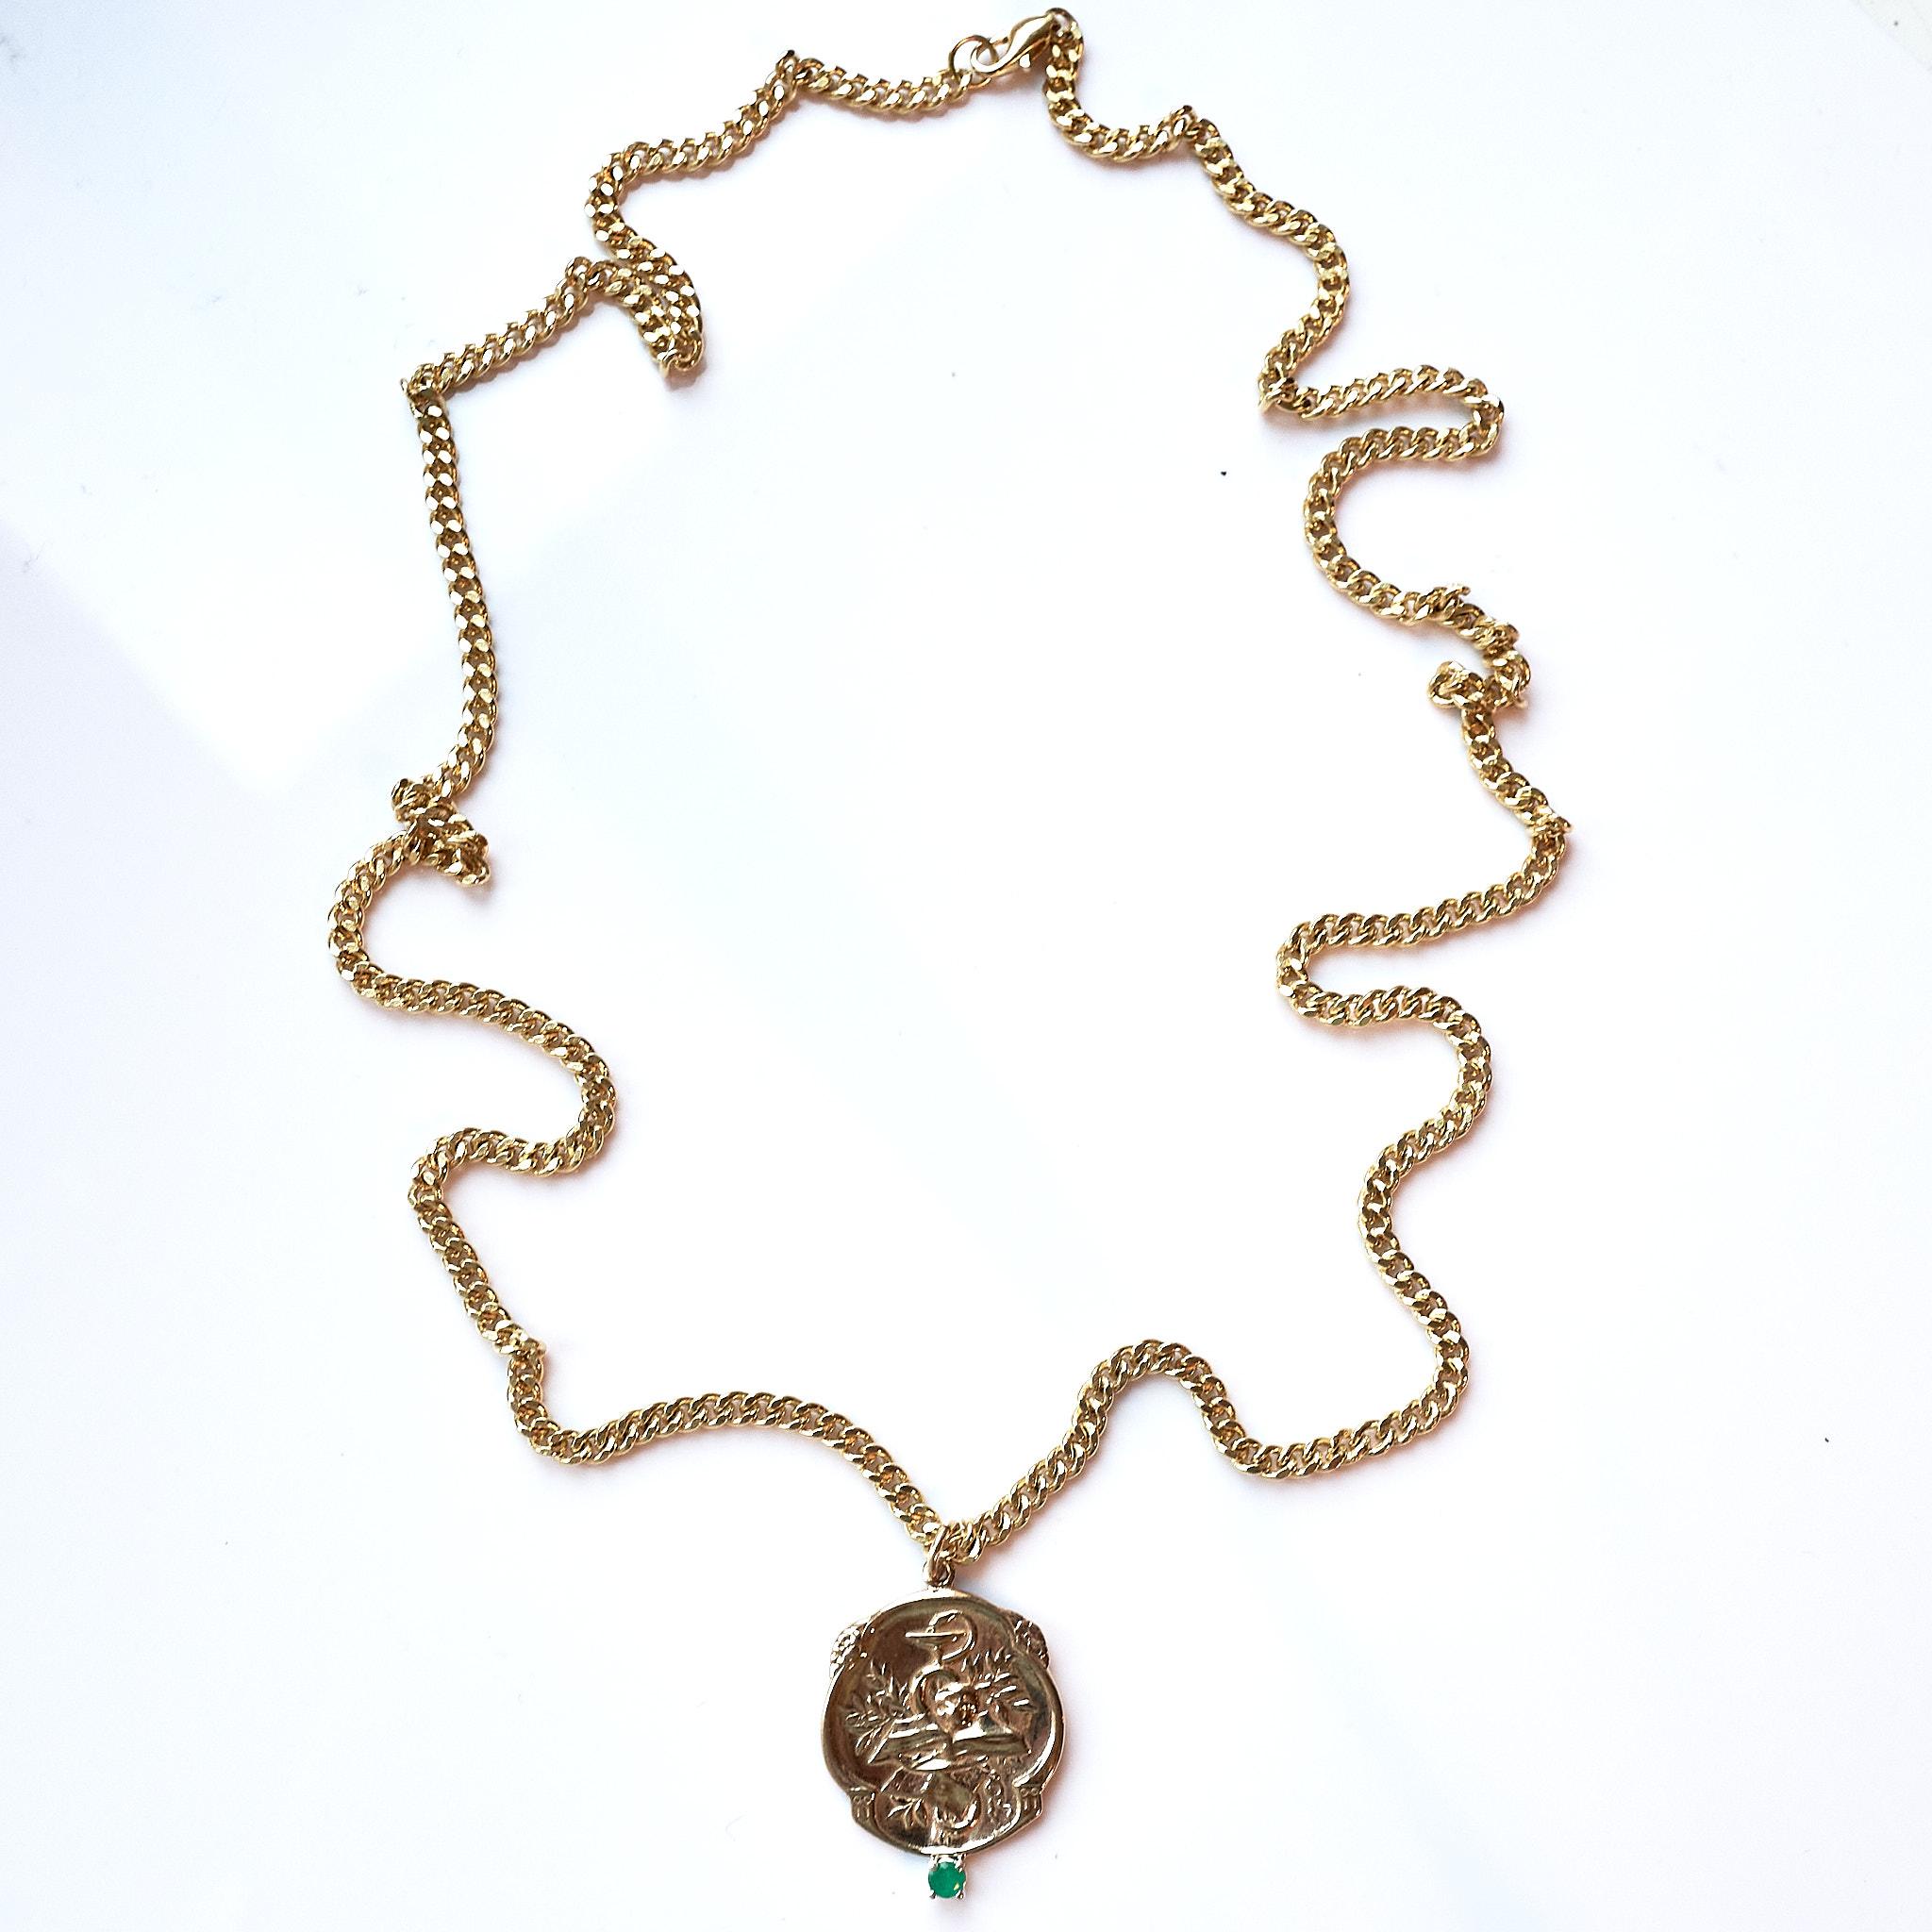 Emerald Victorian Style Memento Mori Medal Necklace Skull Chain J Dauphin In New Condition For Sale In Los Angeles, CA